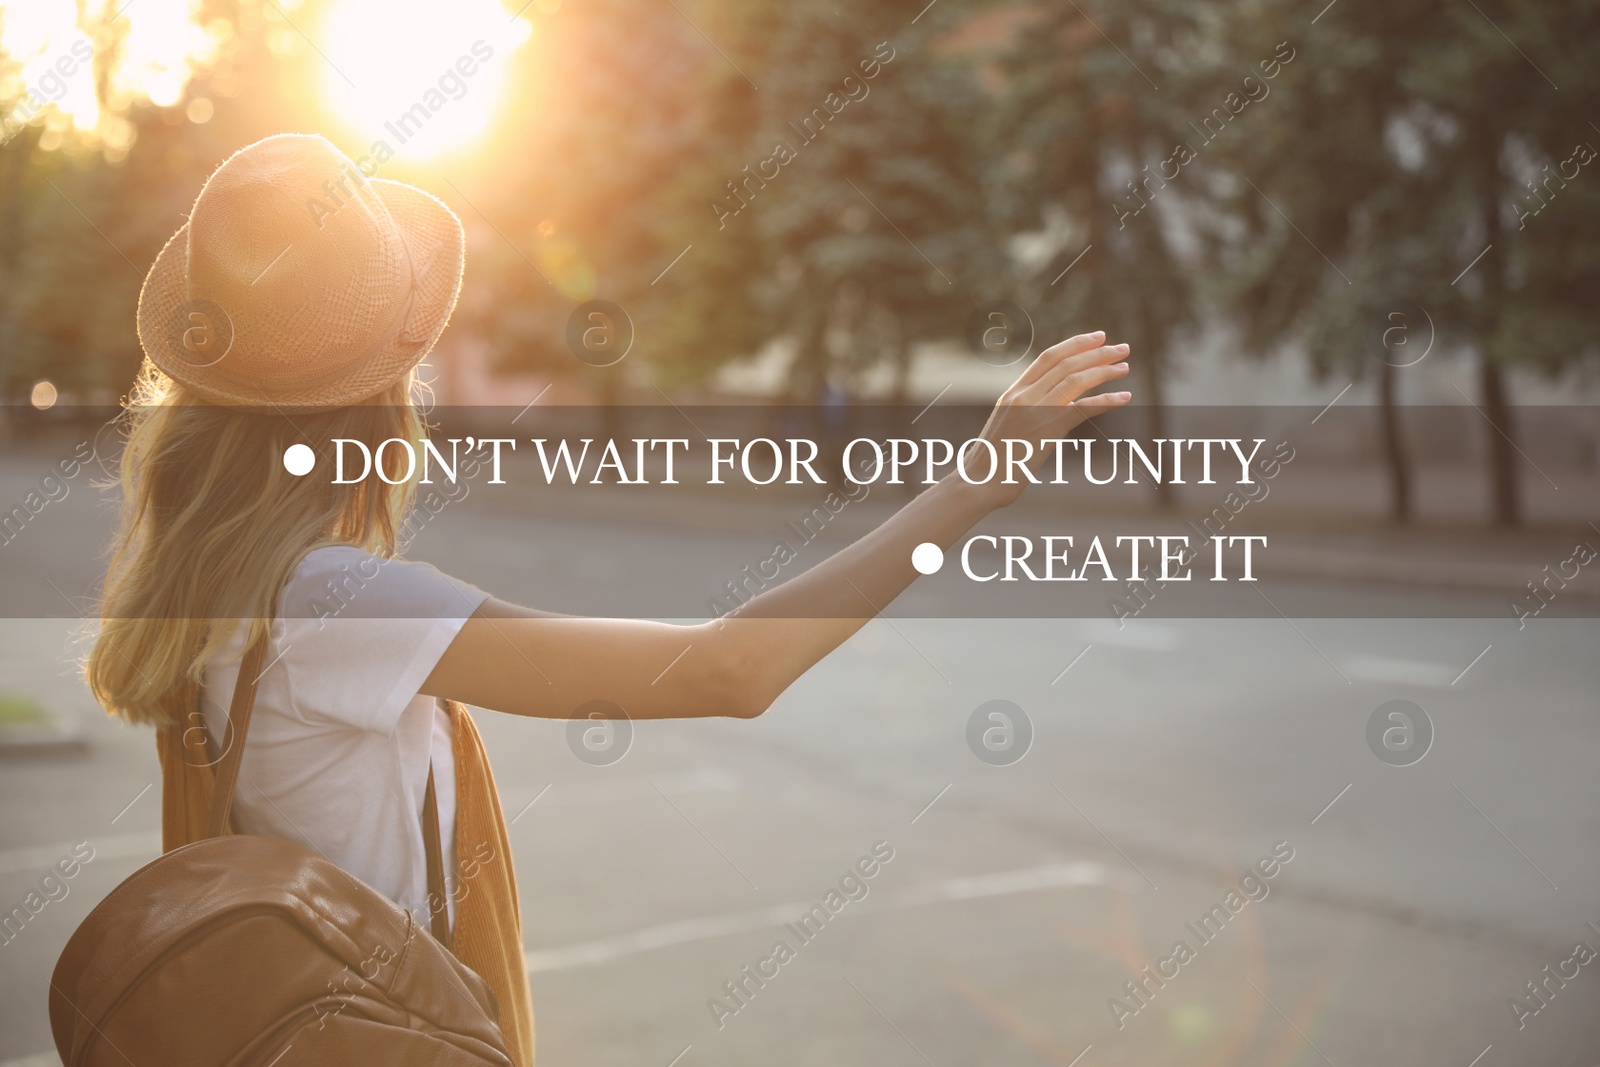 Image of Don't Wait For Opportunity Create It. Inspirational quote motivating to take first step, to be active. Text against view of woman outdoors at sunset